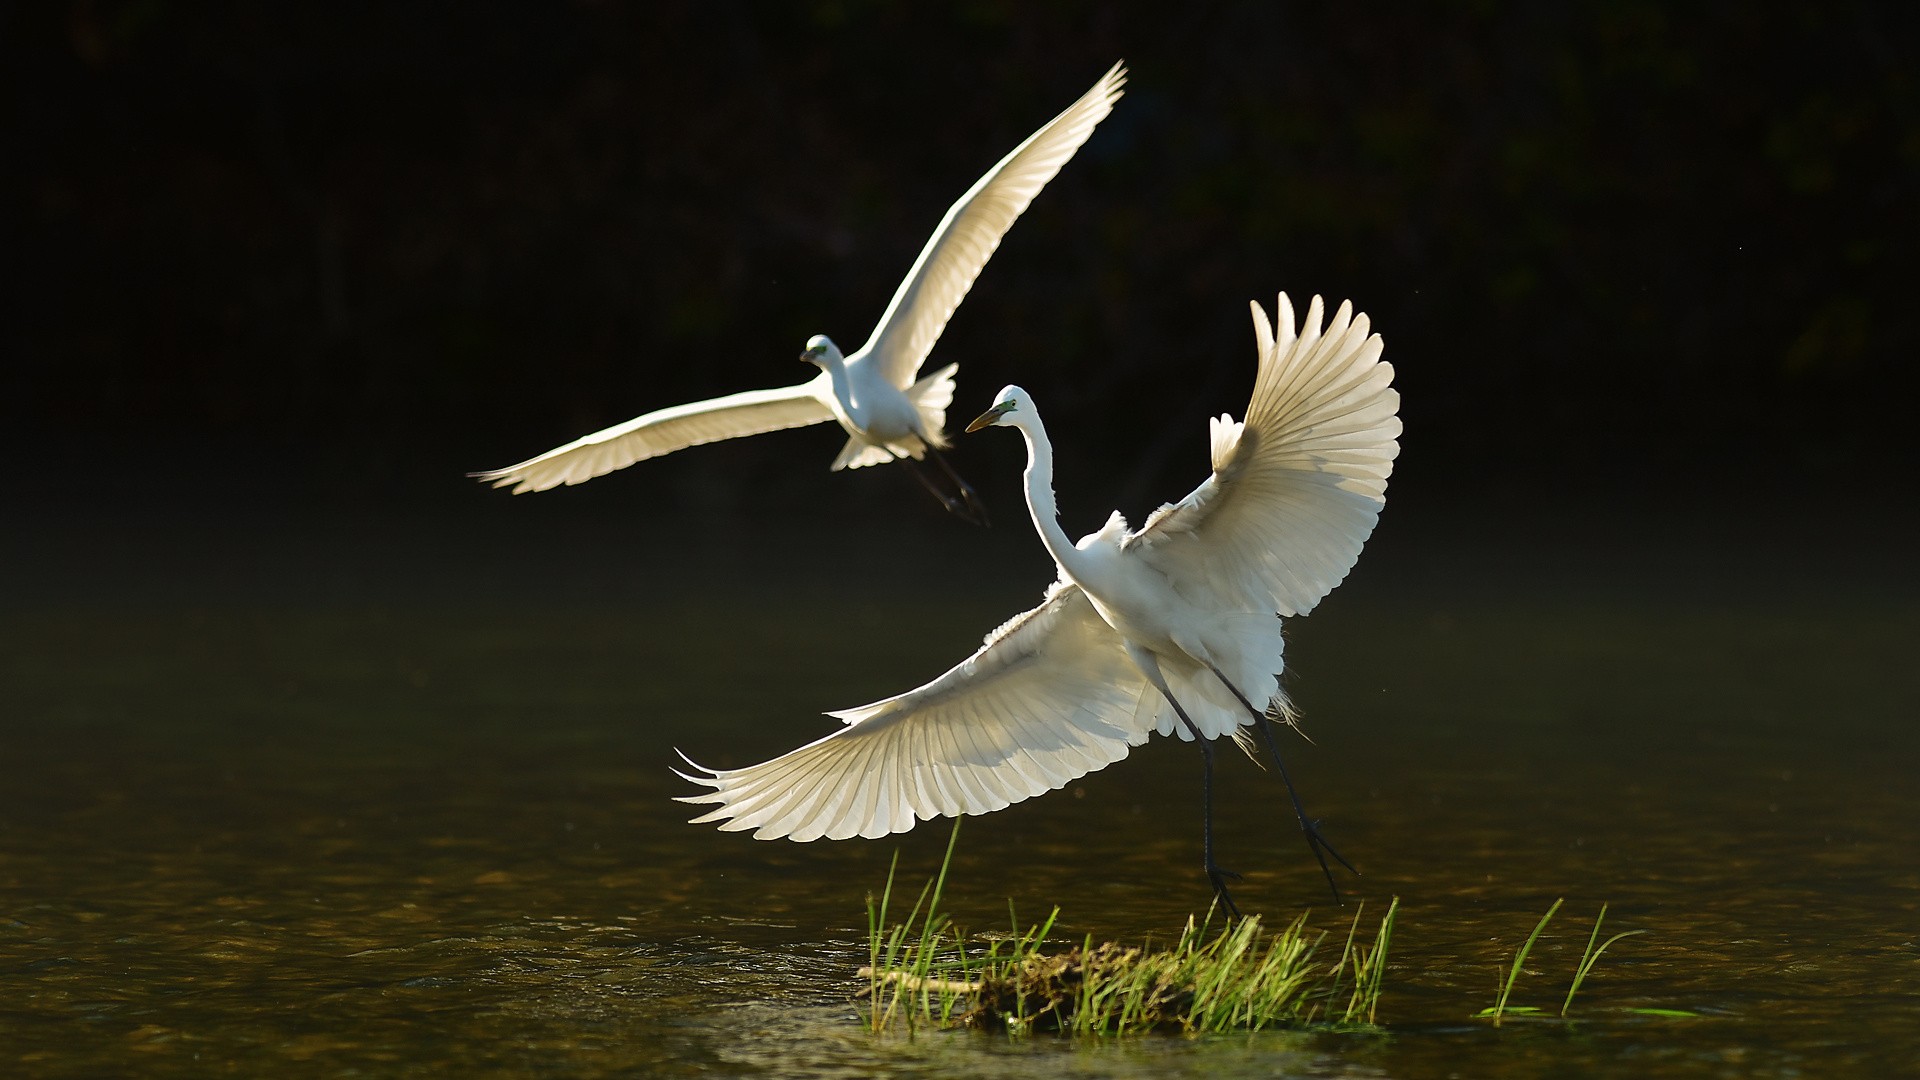 Two herons soaring over the water